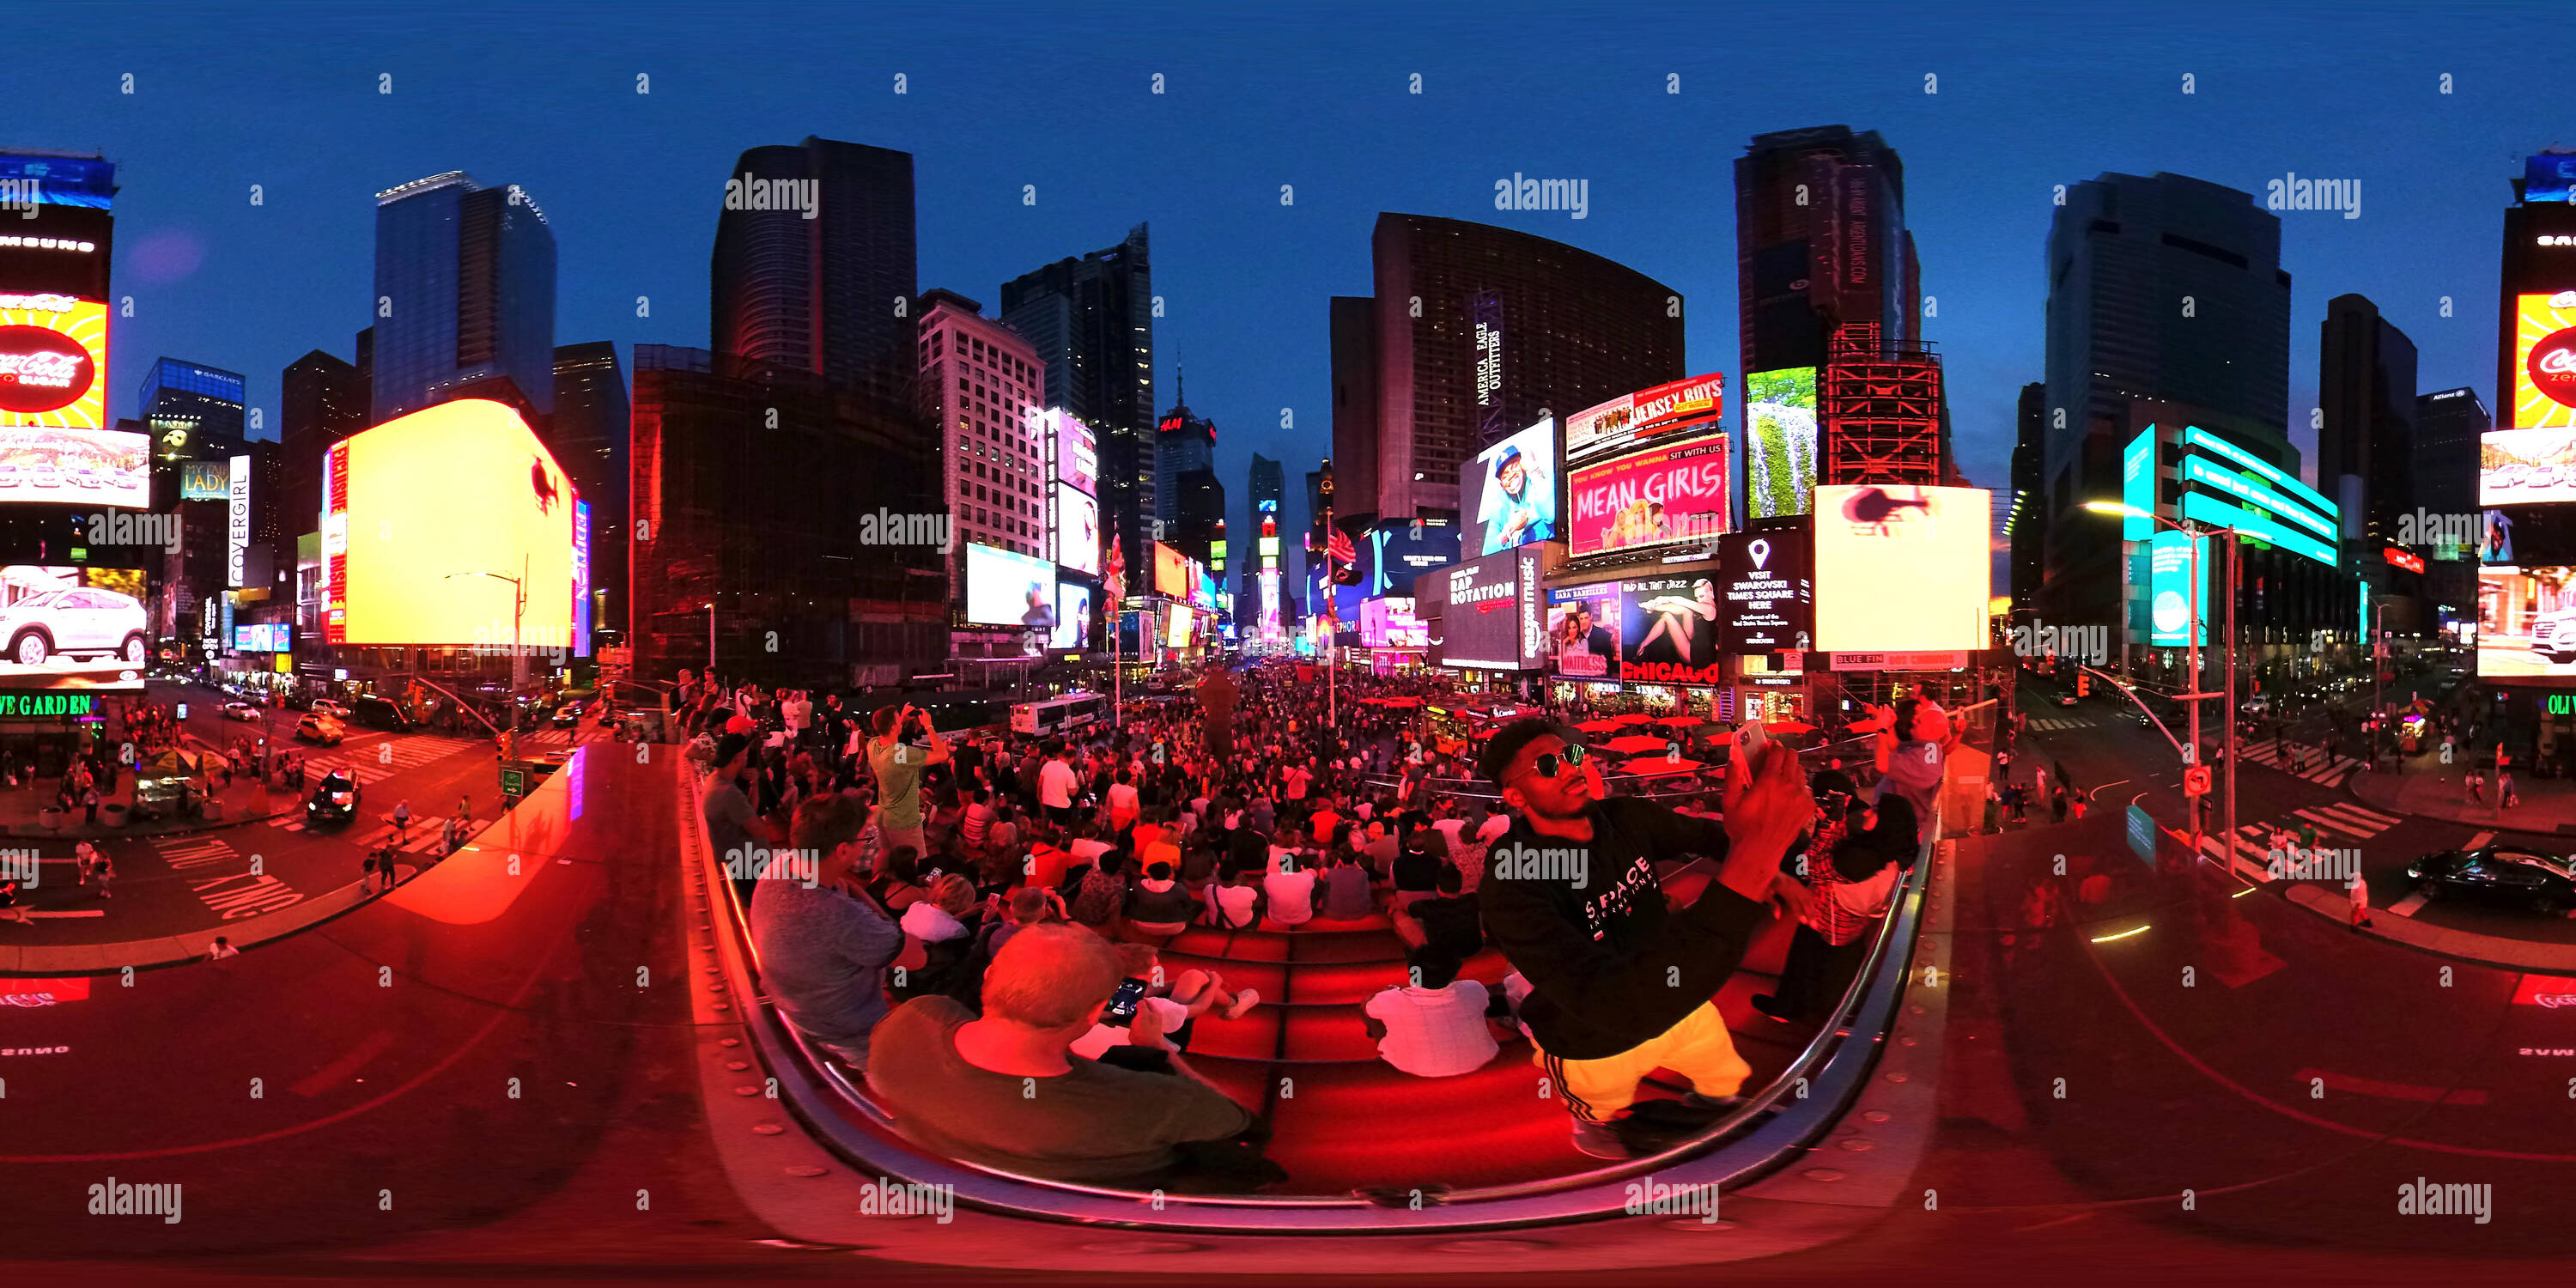 360 degree panoramic view of 360 degree panorama of Times Square  NYC at dusk with black man wearing shades taking a selfie centre frame.